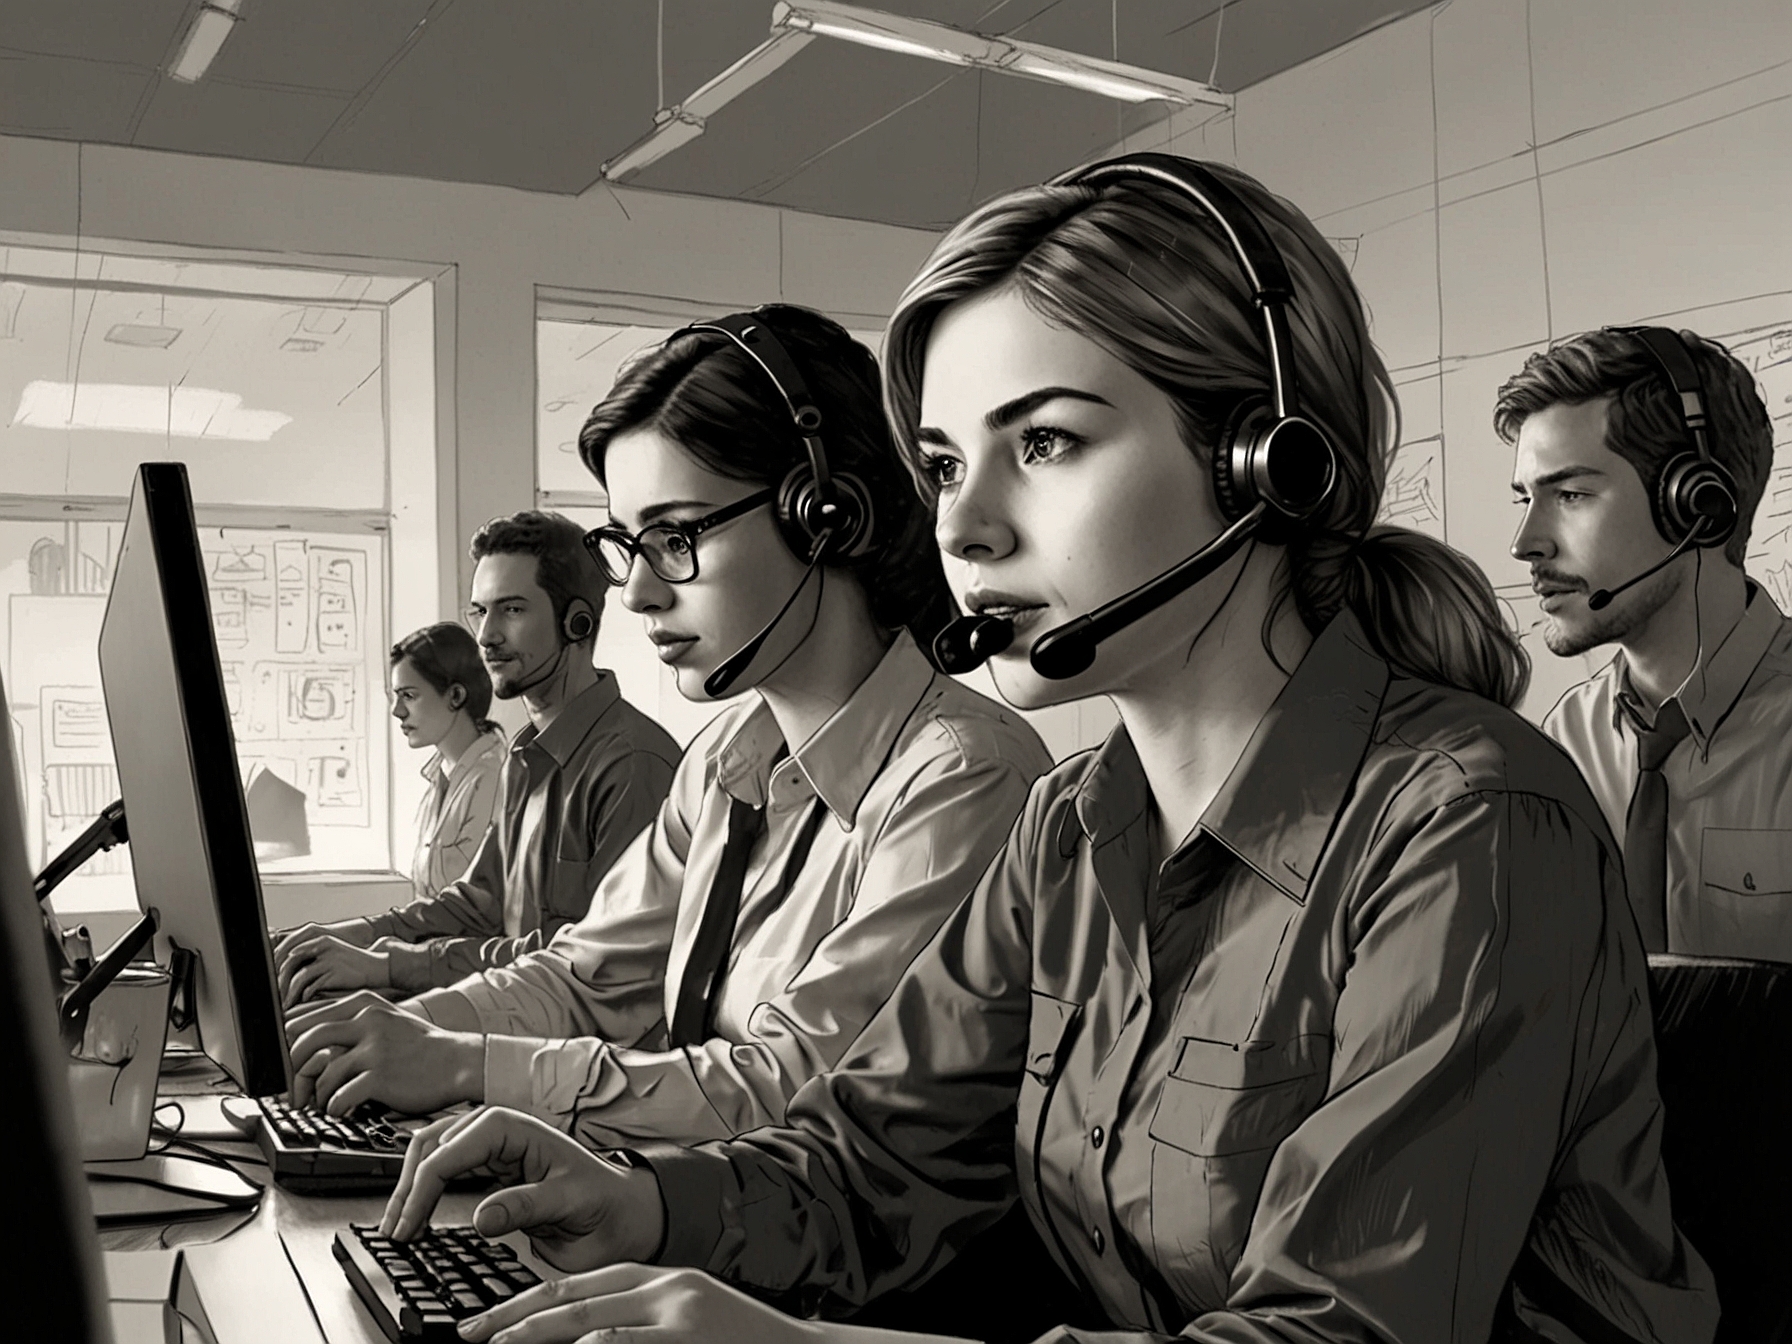 A mobile customer support team working diligently at a help center, addressing complaints and trying to resolve the ongoing service interruptions affecting international roaming users.